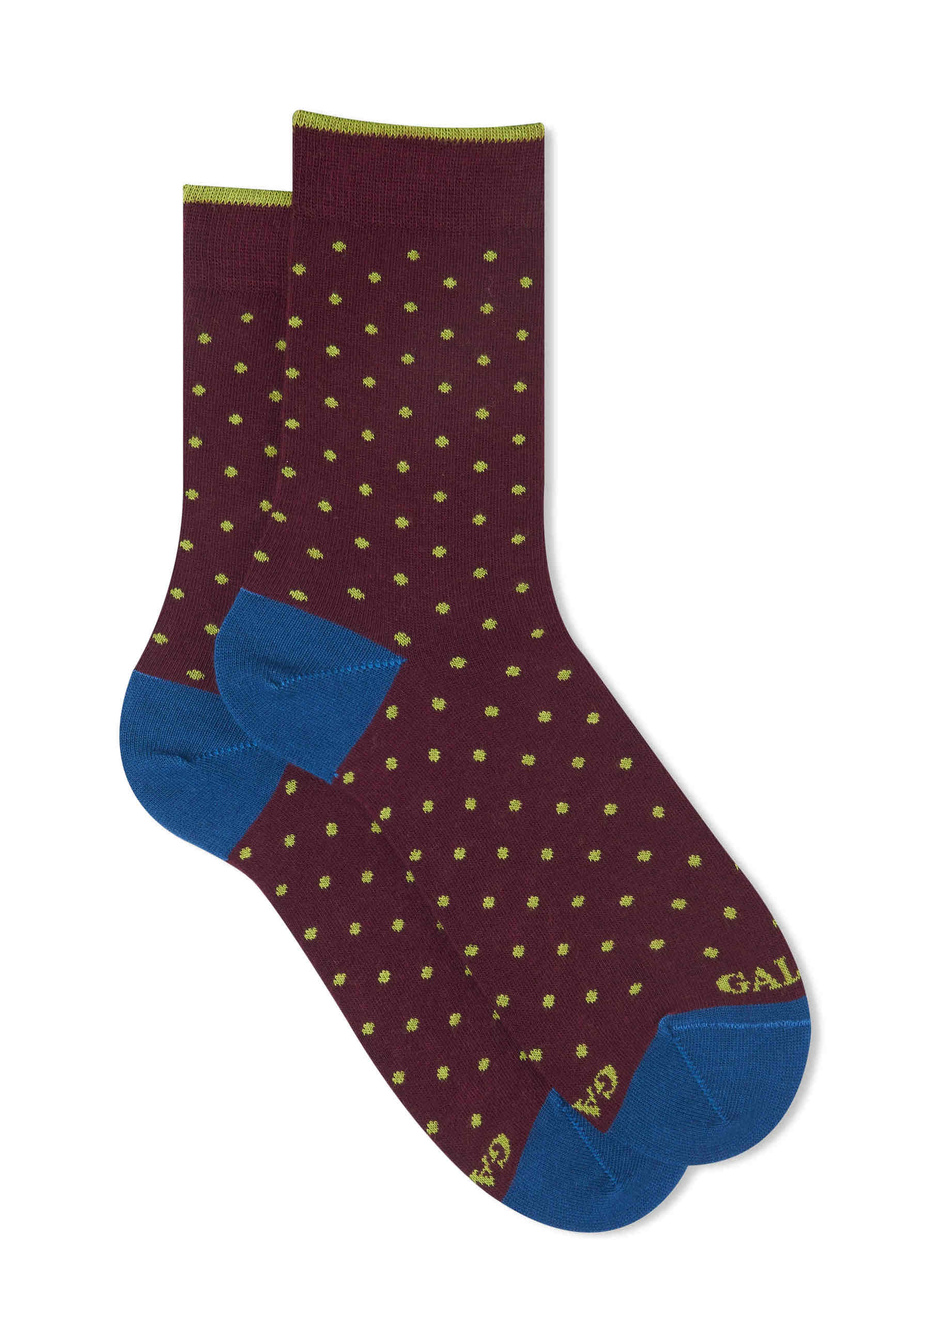 Women's short burgundy cotton socks with polka dots - Gallo 1927 - Official Online Shop